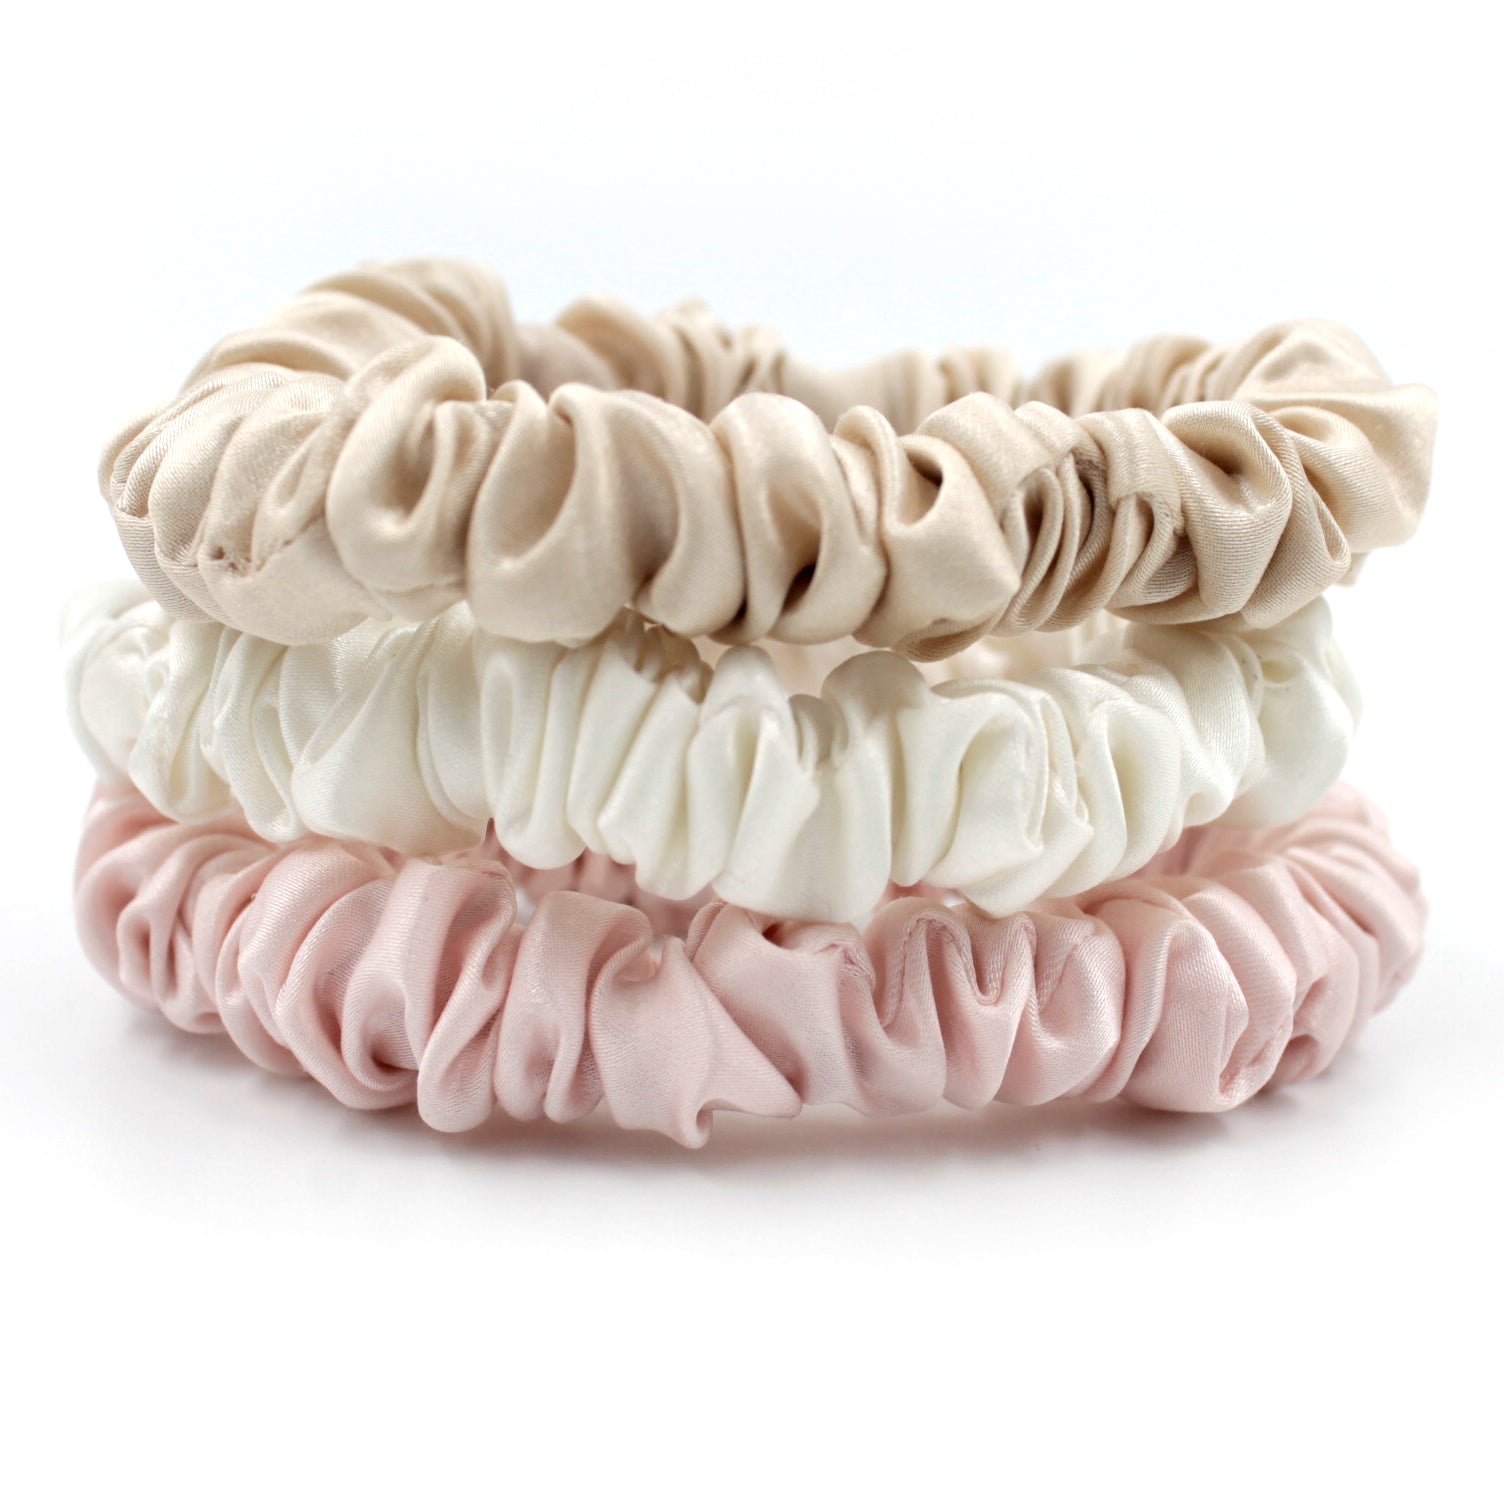 Mulberry Park Silks Doorbuster: Small Scrunchie Set - Ivory, Pink, Sand Skinny Stack